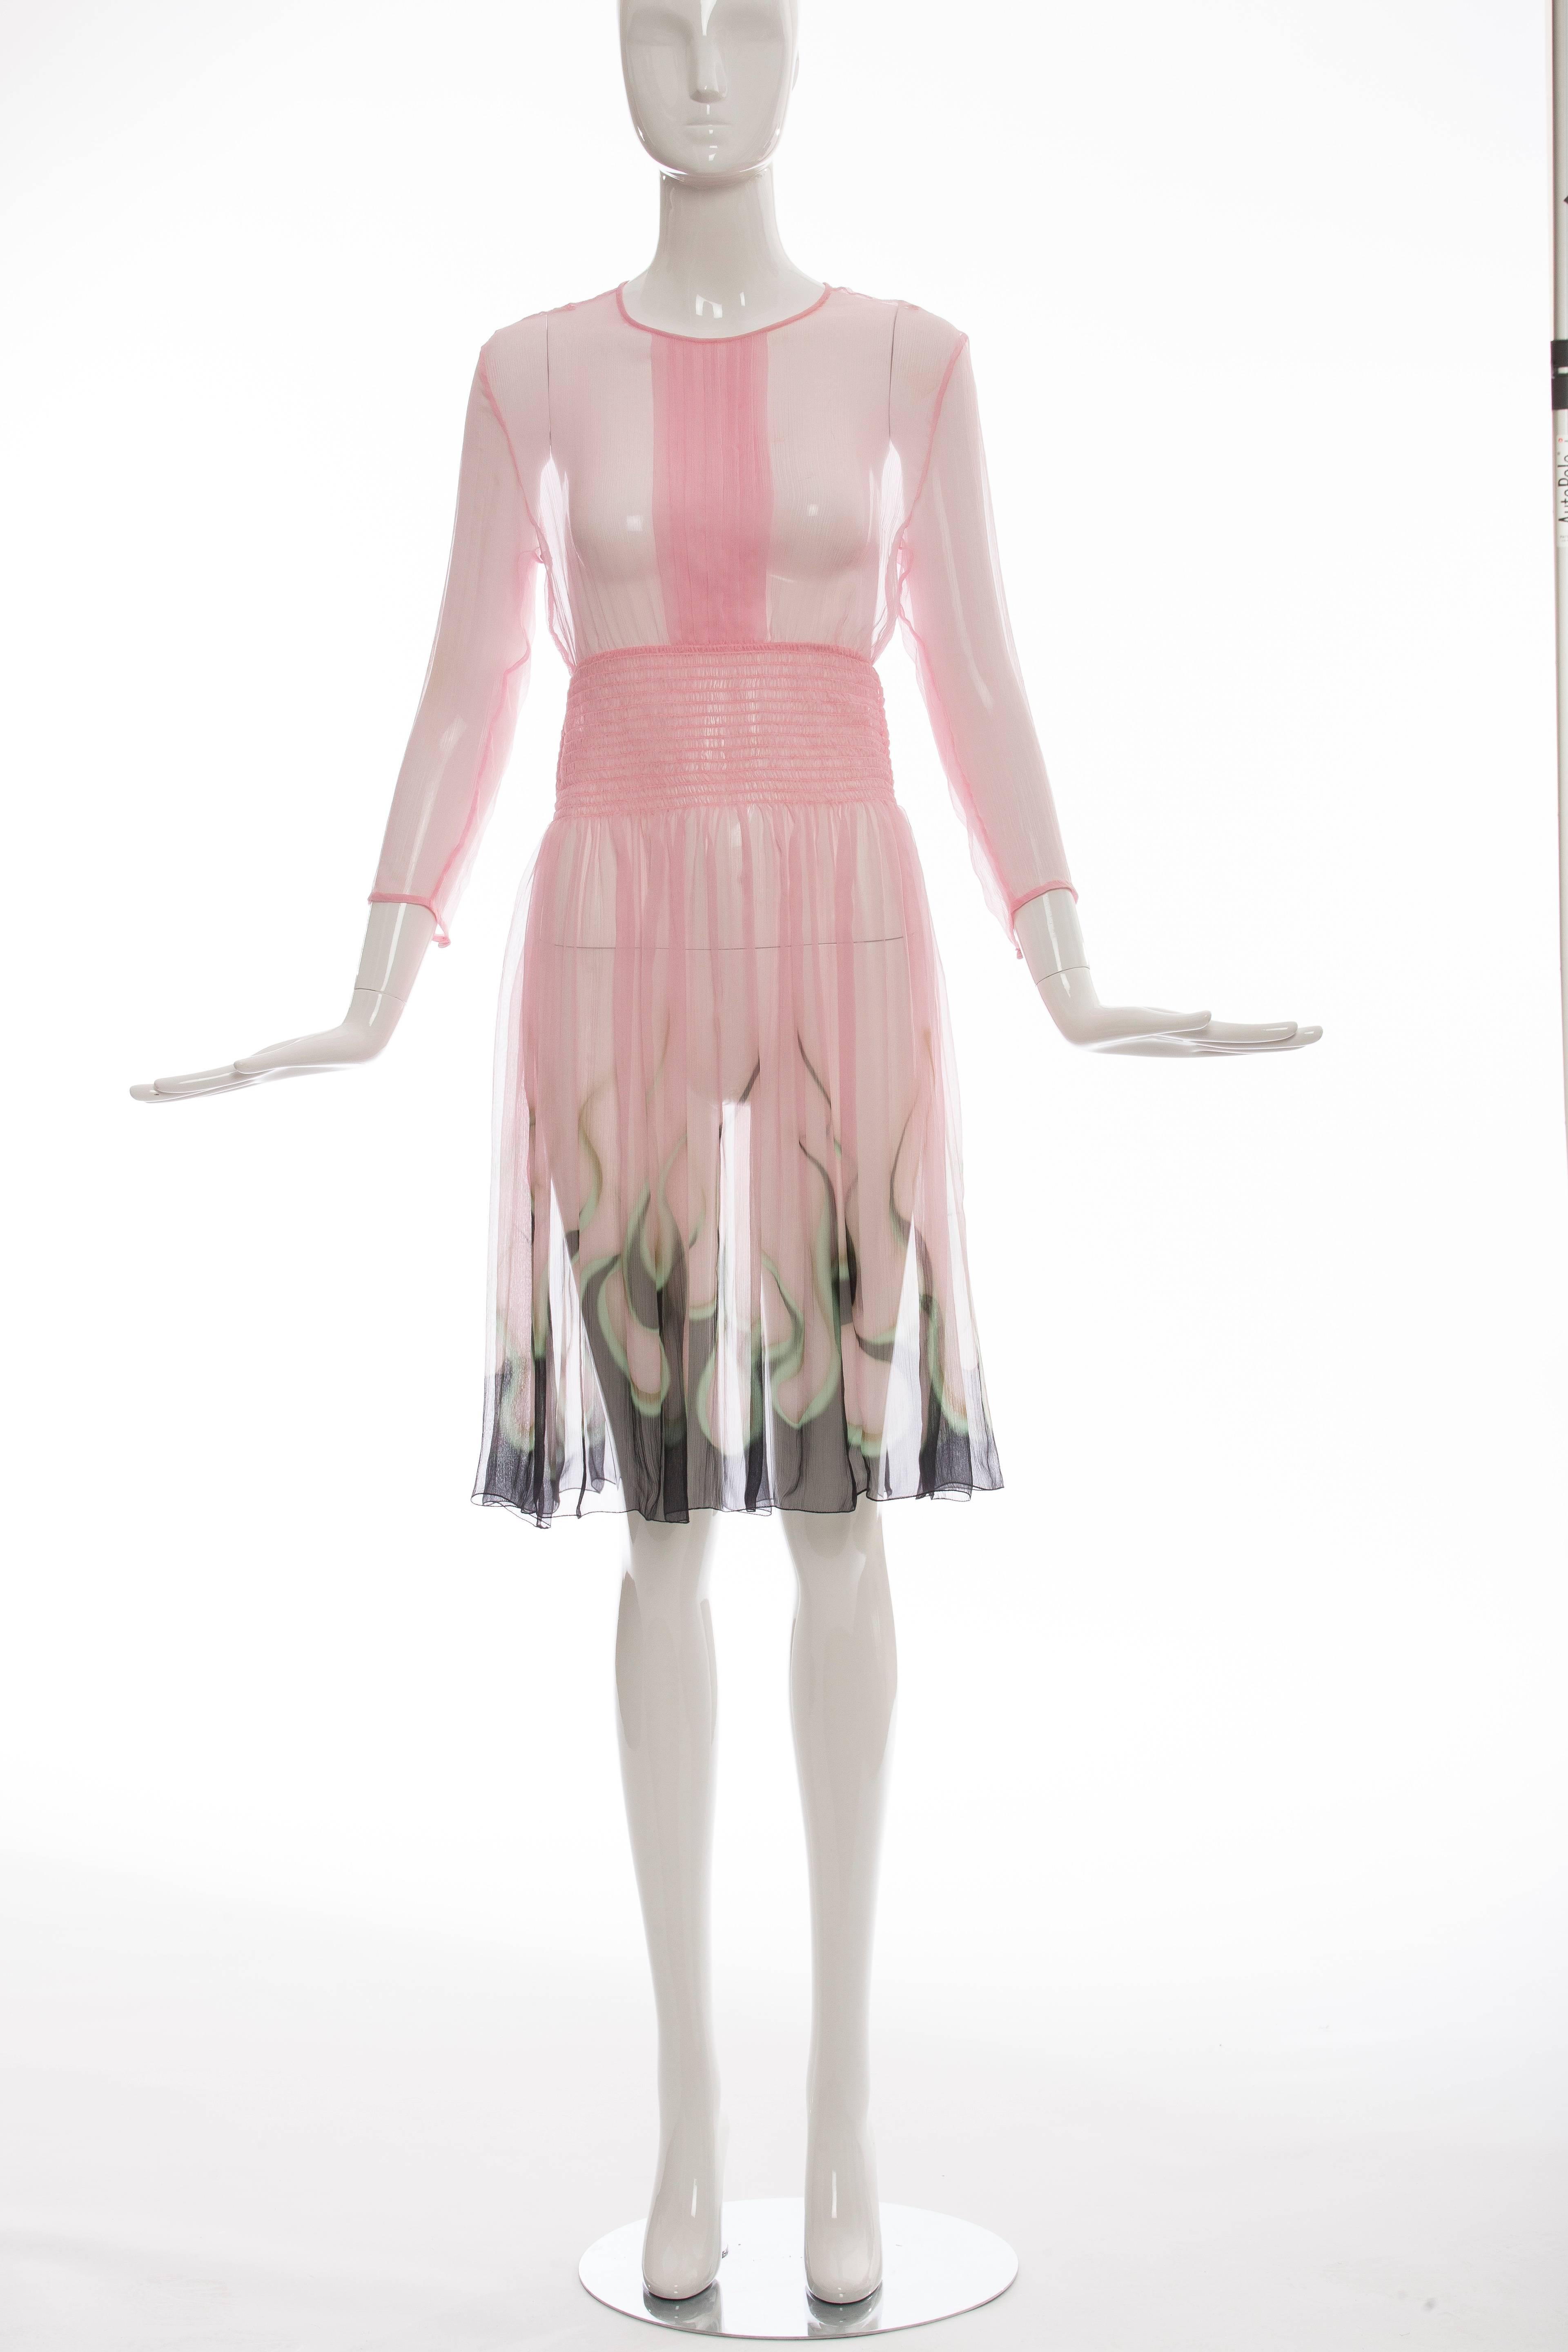 Prada, Spring 2012 pink silk chiffon dress with long sleeves, smocked waist, flame print at hem and single button closure at nape.

IT, 40
US. 4

Bust 38”, Waist 26”, Hip 60”, Length 39”
Fabric Content: 100% Silk